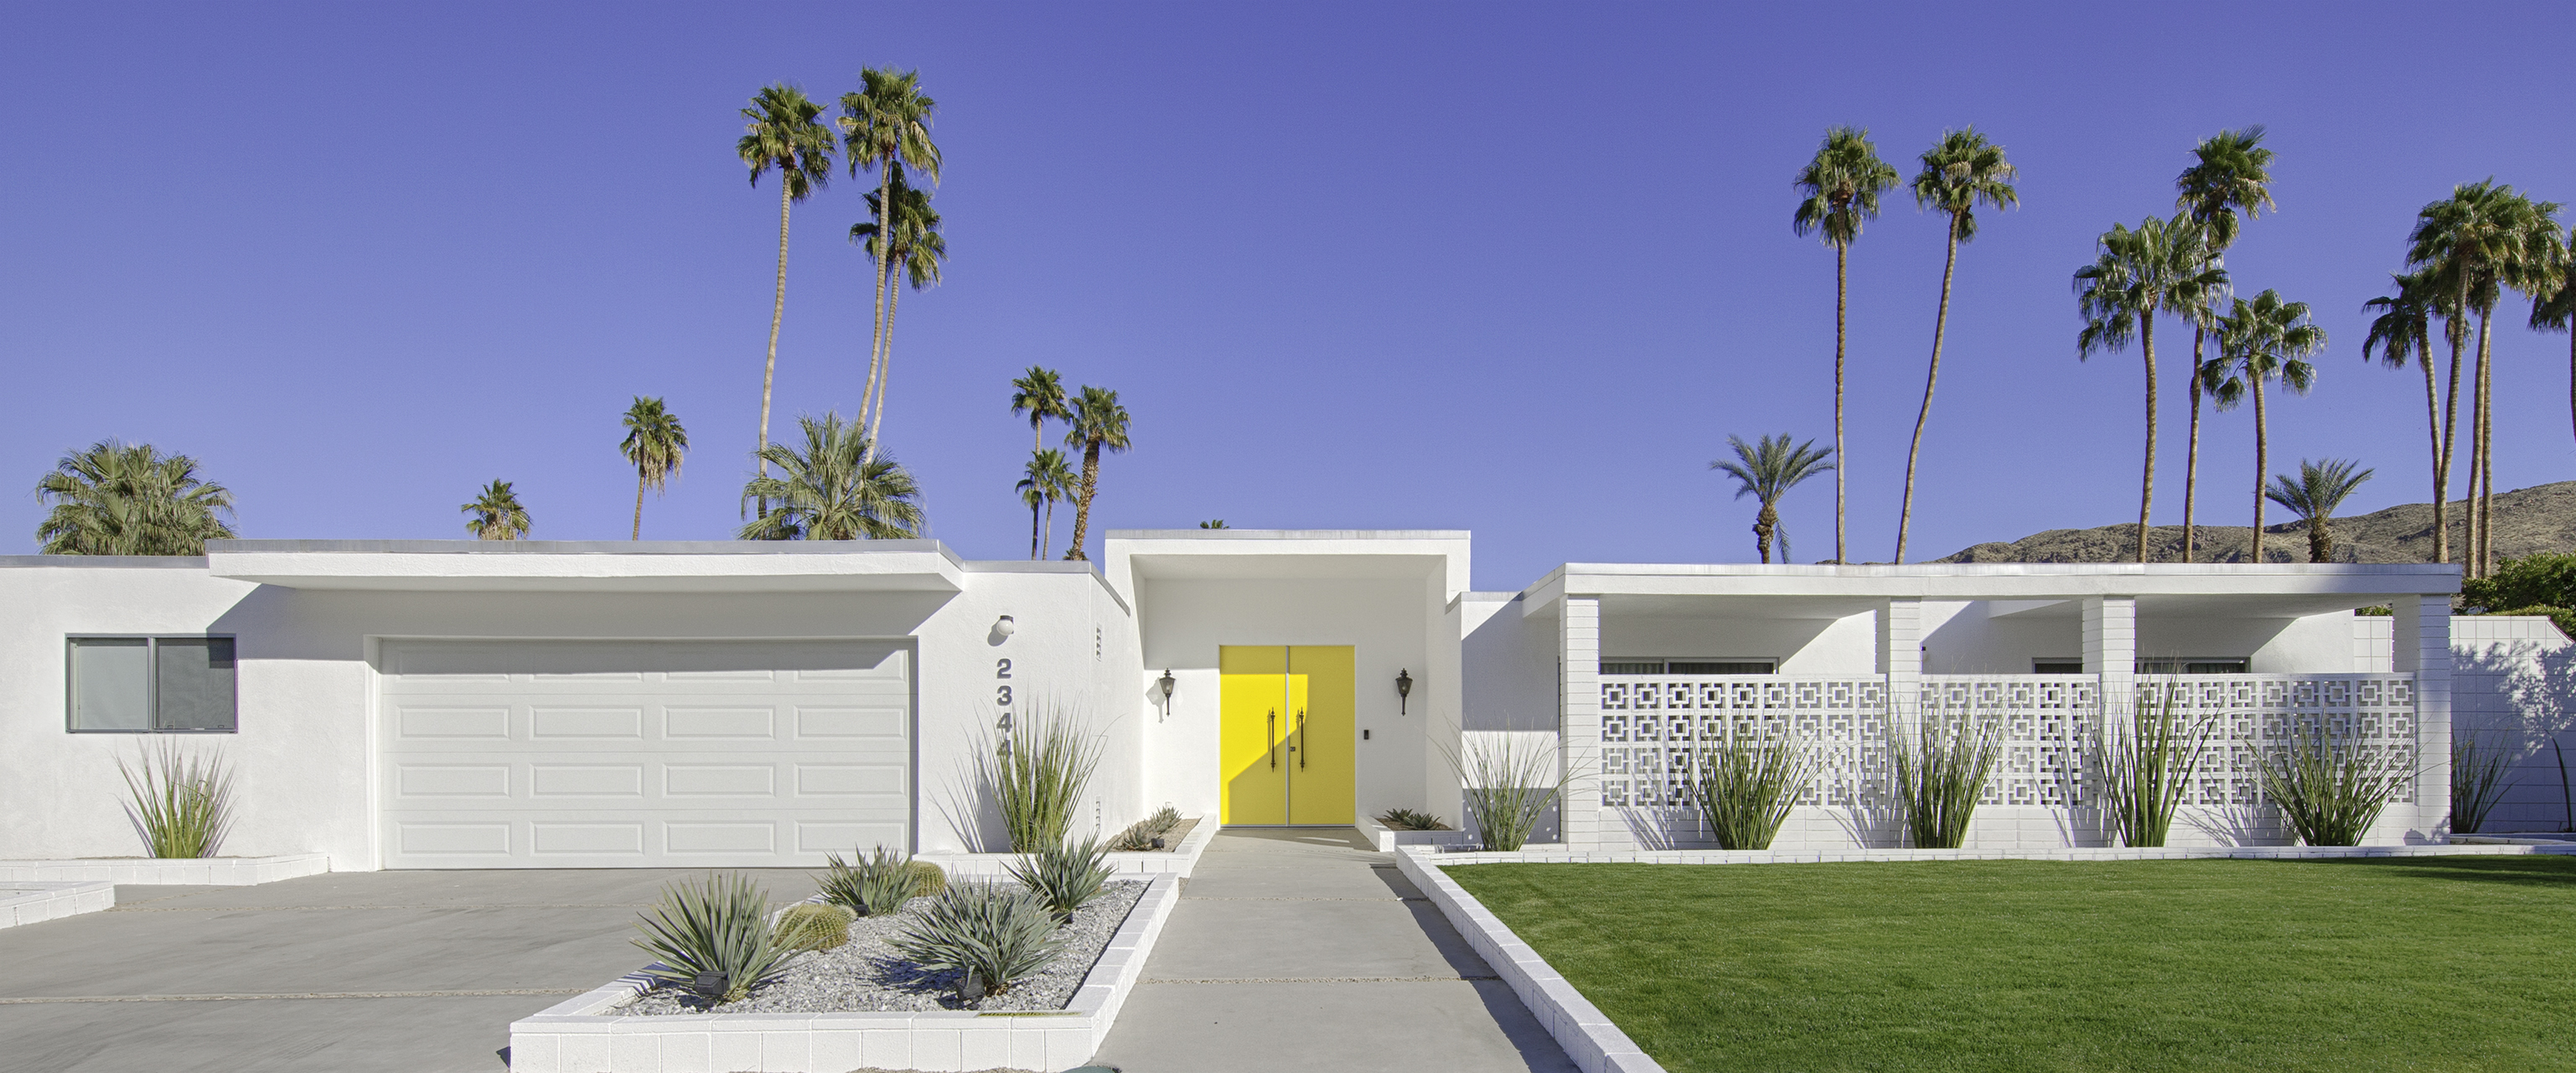 palm springs second homes, coachella valley second homes